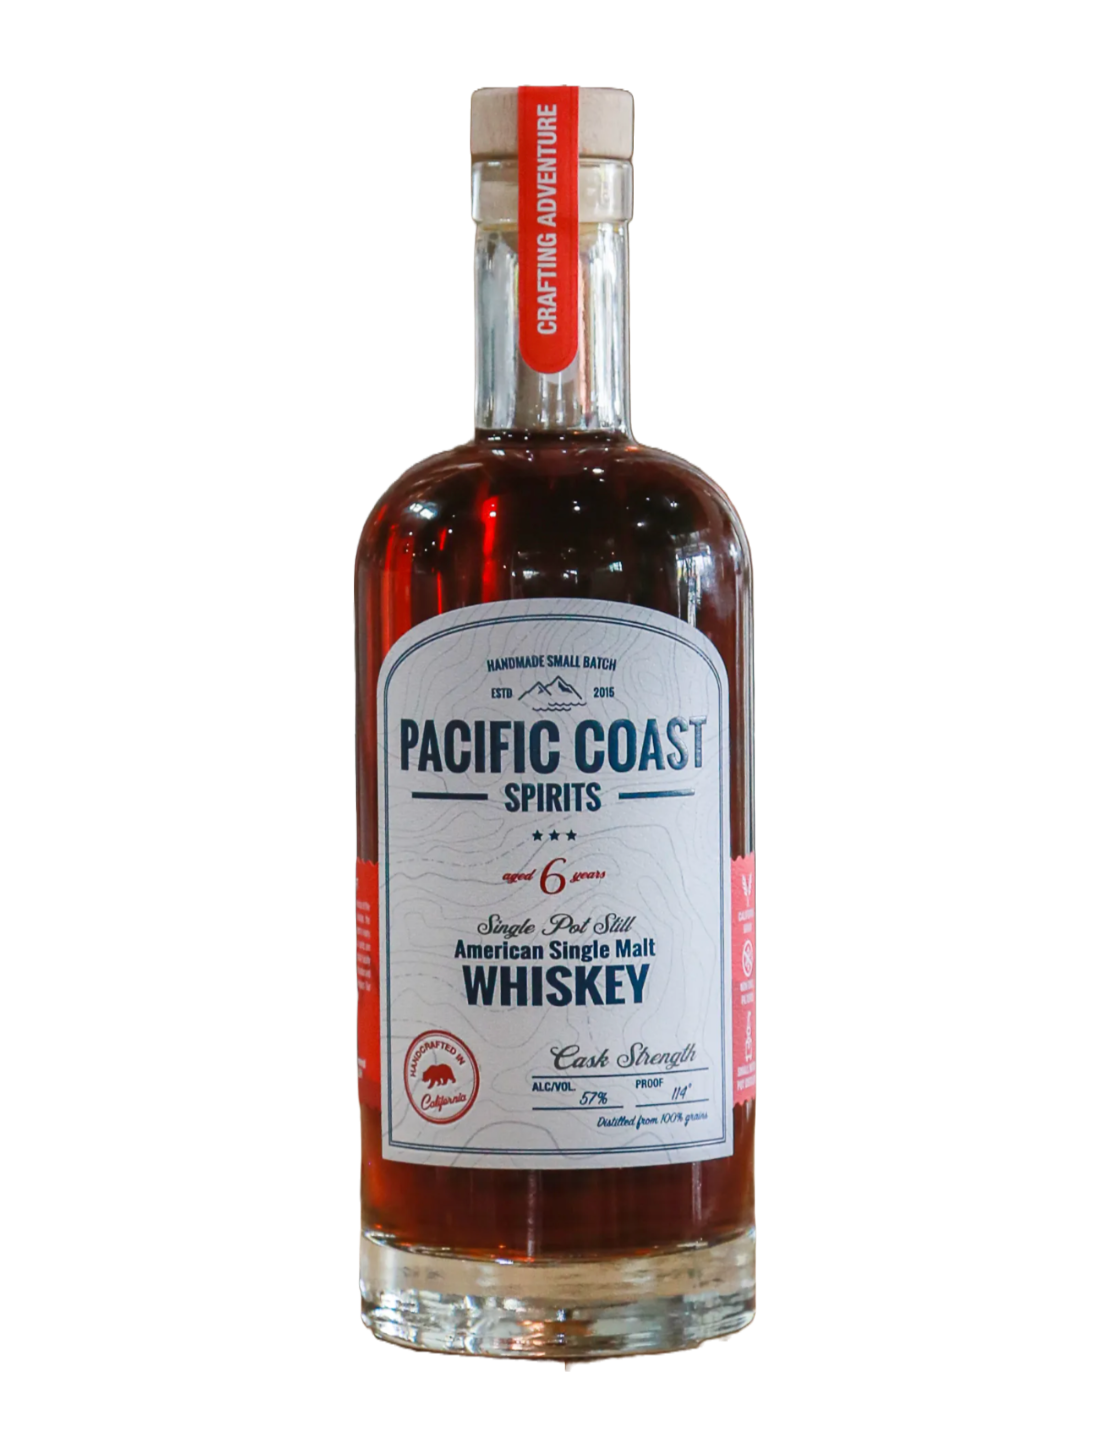 An elegant bottle of Pacific Coast Spirits American Single Malt Whiskey in front of a white background